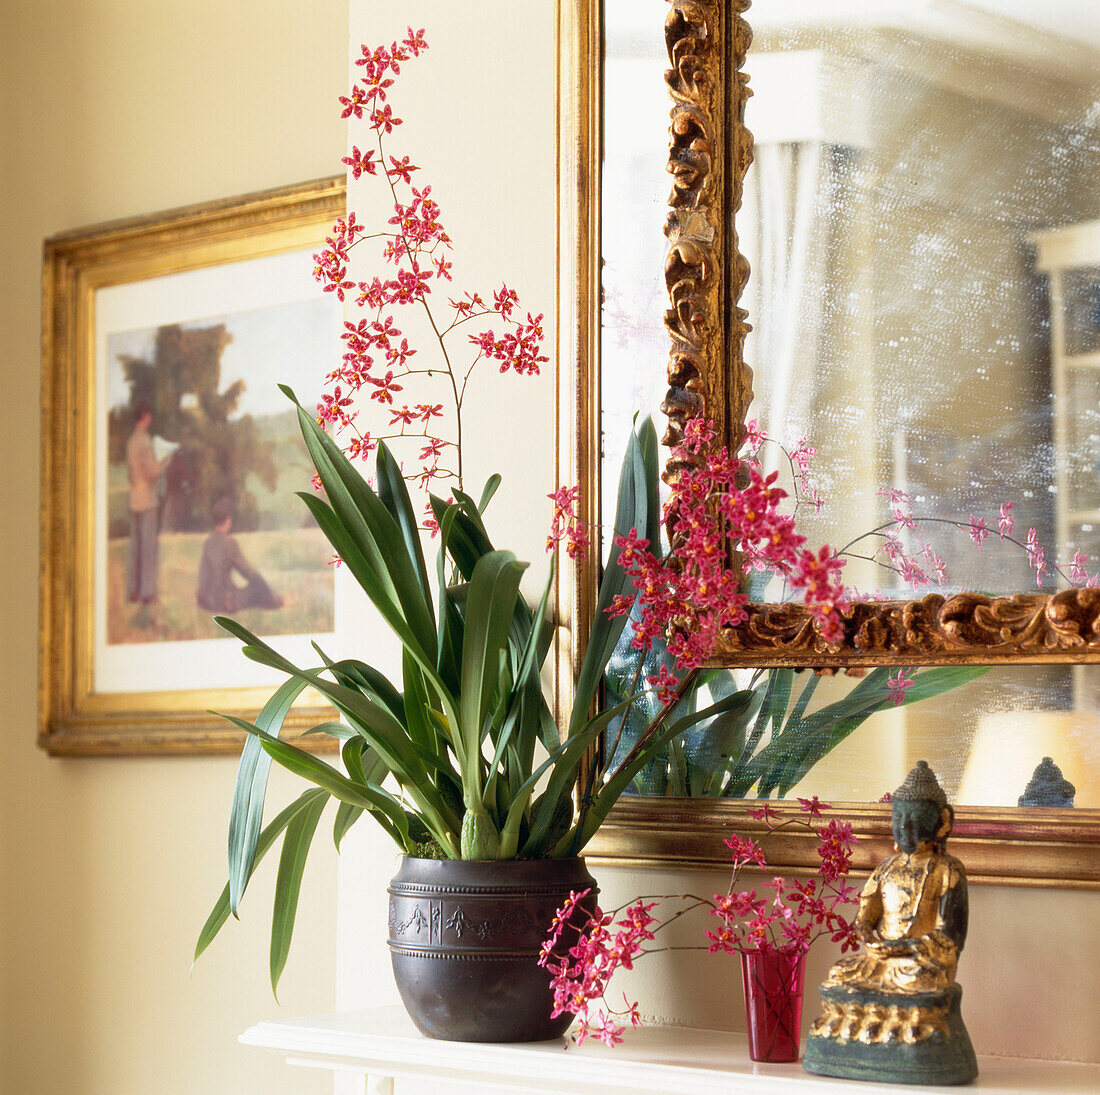 Pretty pink orchids on mantlepiece with ornate gilt mirror and Buddha